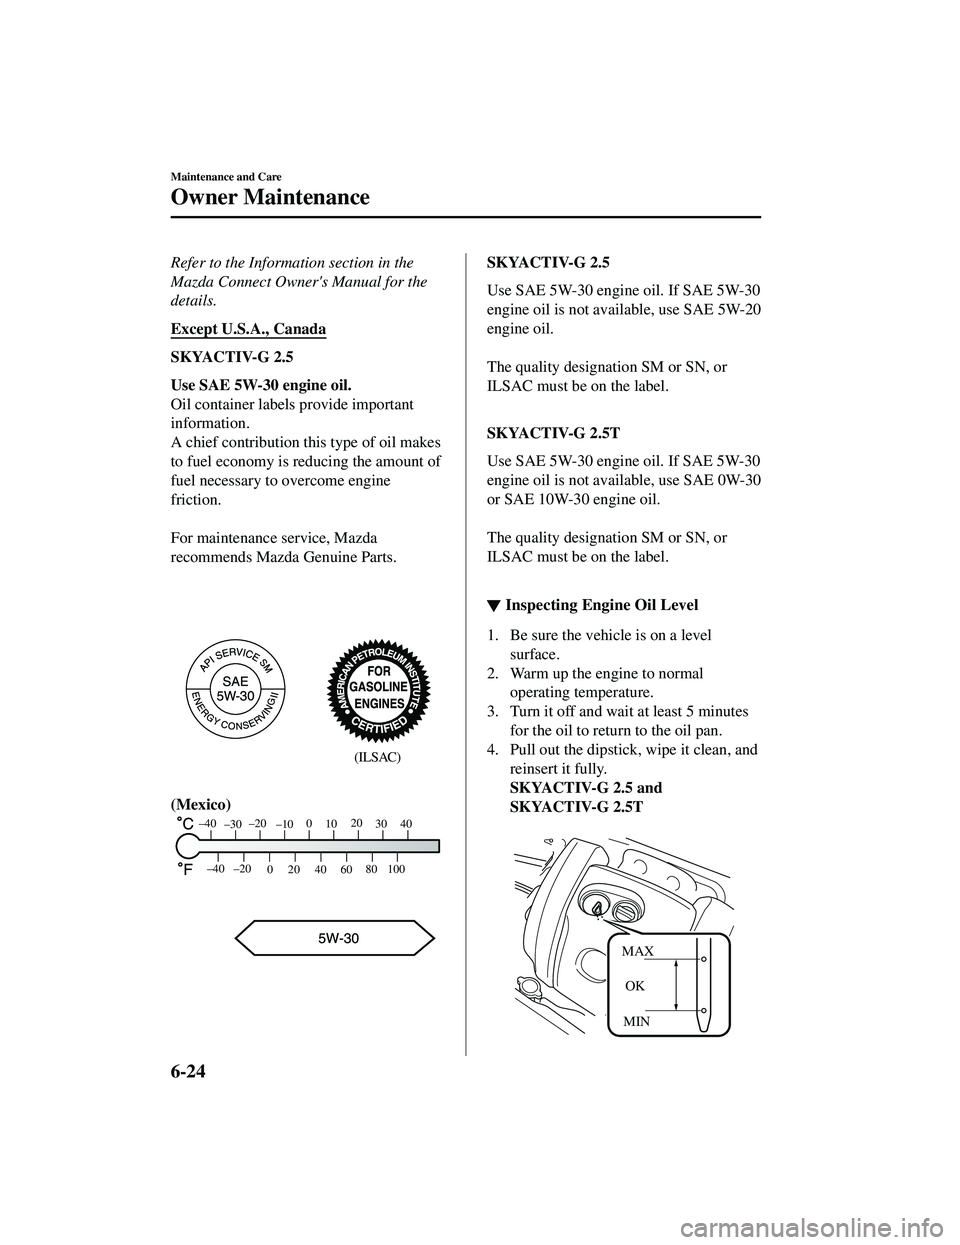 MAZDA MODEL CX-5 2021  Owners Manual Refer to the Information section in the
Mazda Connect Owners Manual for the
details.
Except U.S.A., Canada
SKYACTIV-G 2.5
Use SAE 5W-30 engine oil.
Oil container labels provide important
information.